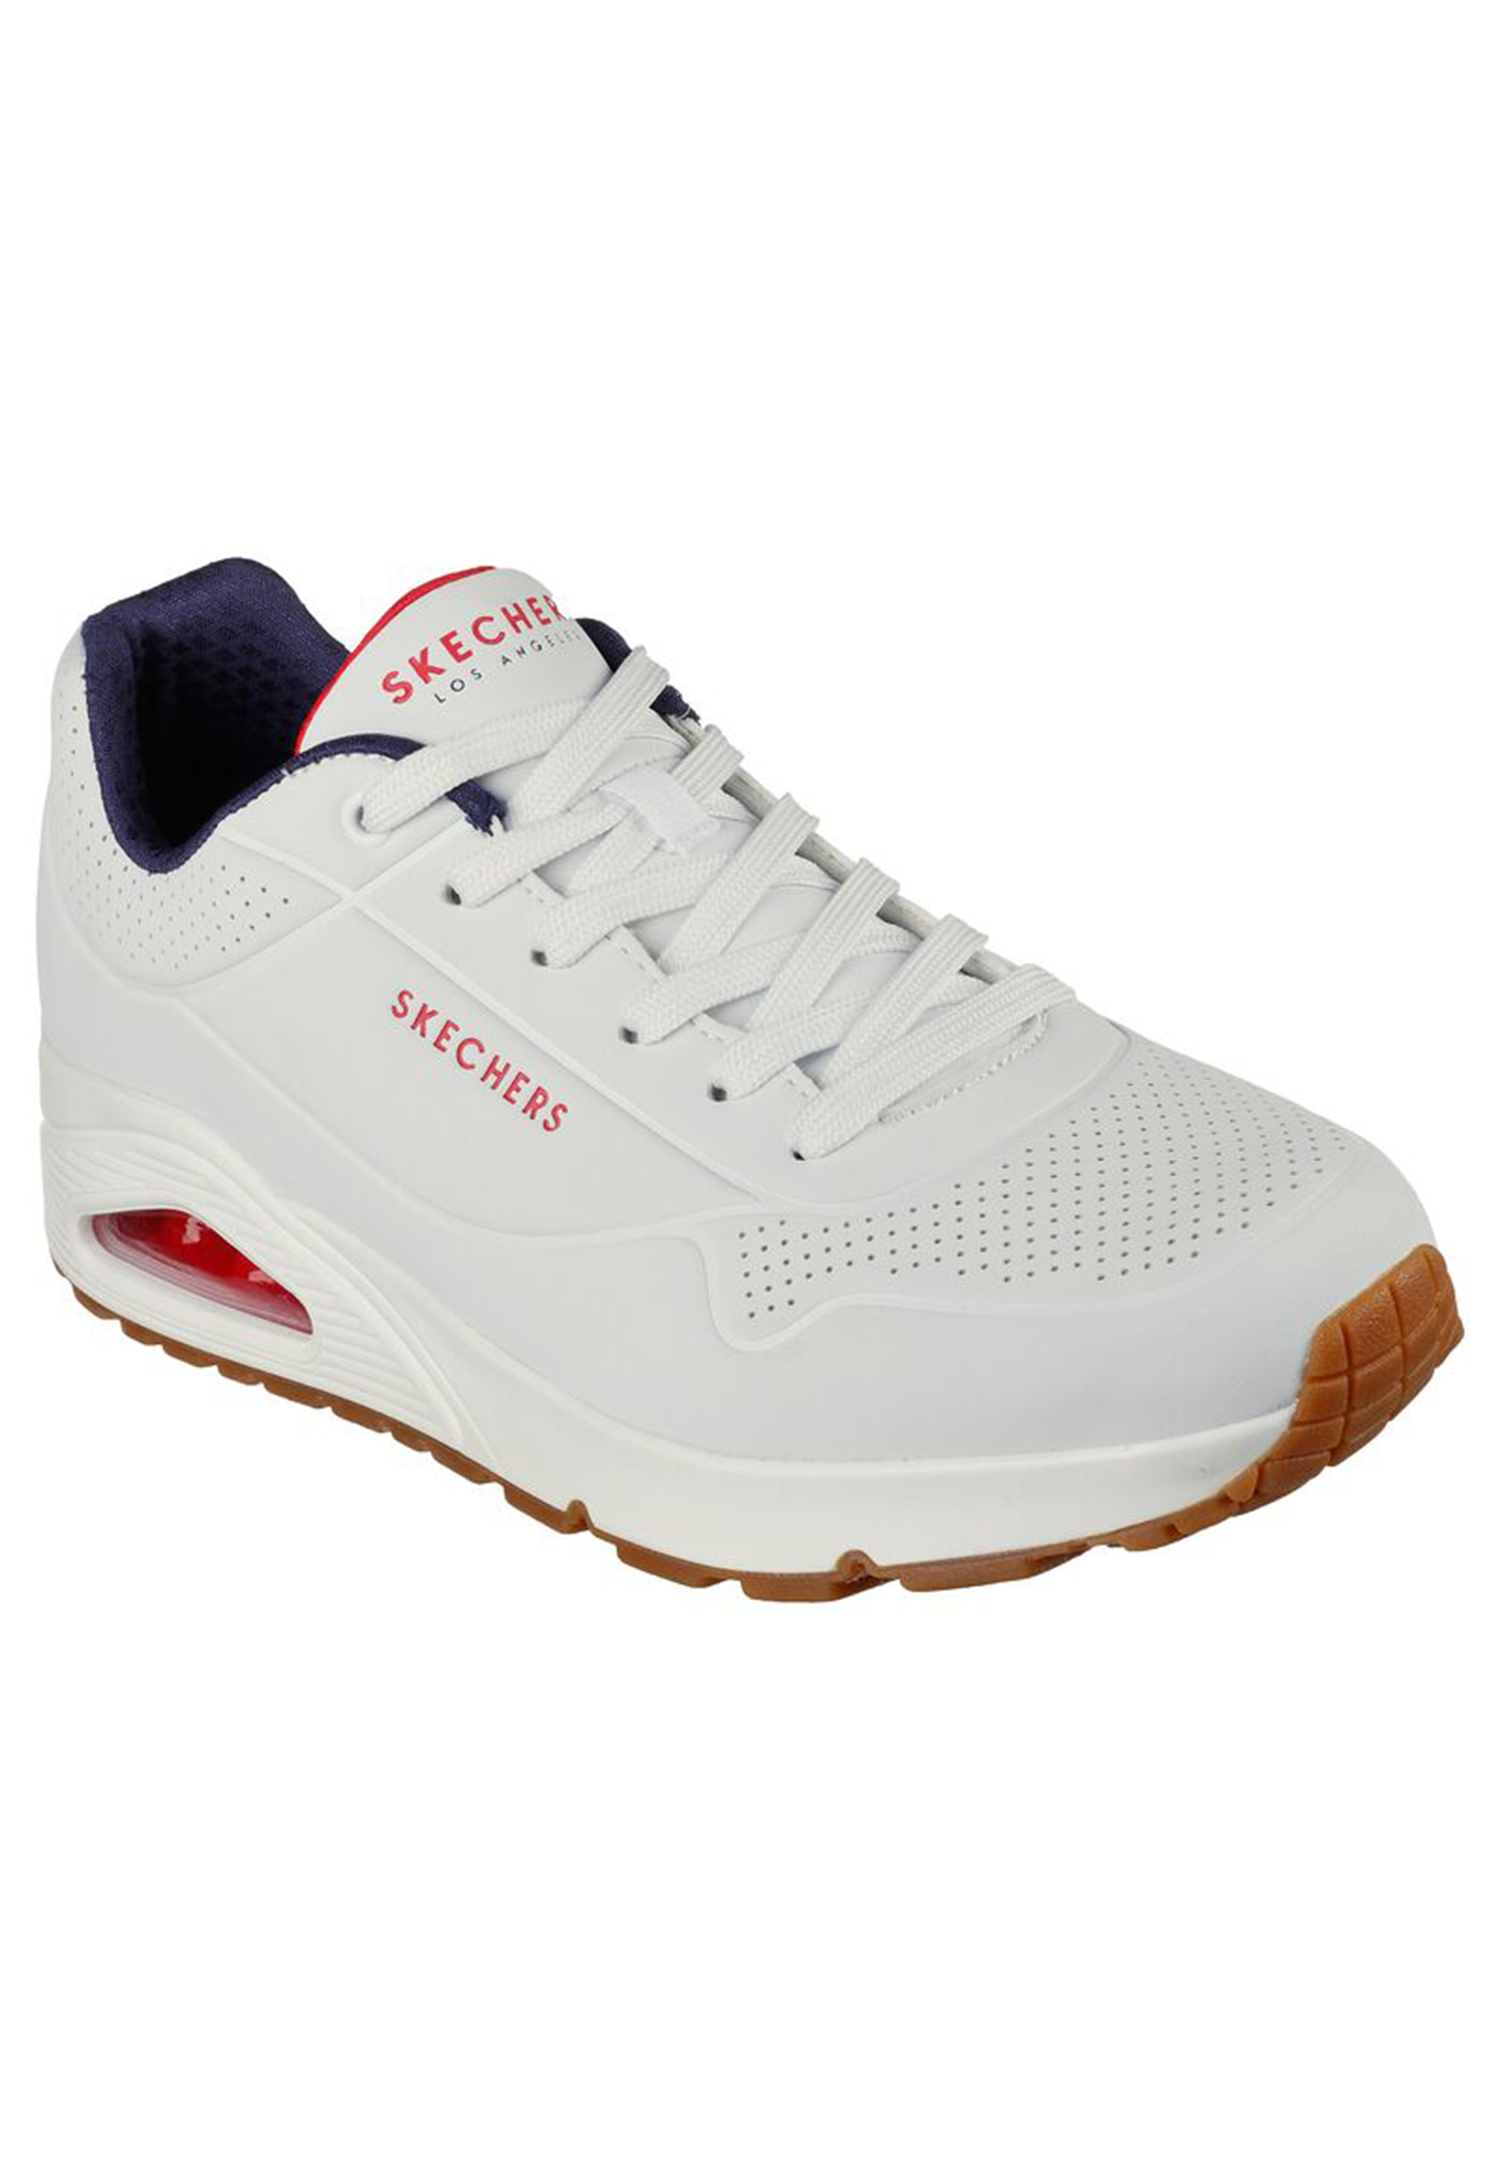 Skechers Mens Sport Casual UNO STAND ON AIR Sneakers Men 52458 white/navy/red von Skechers